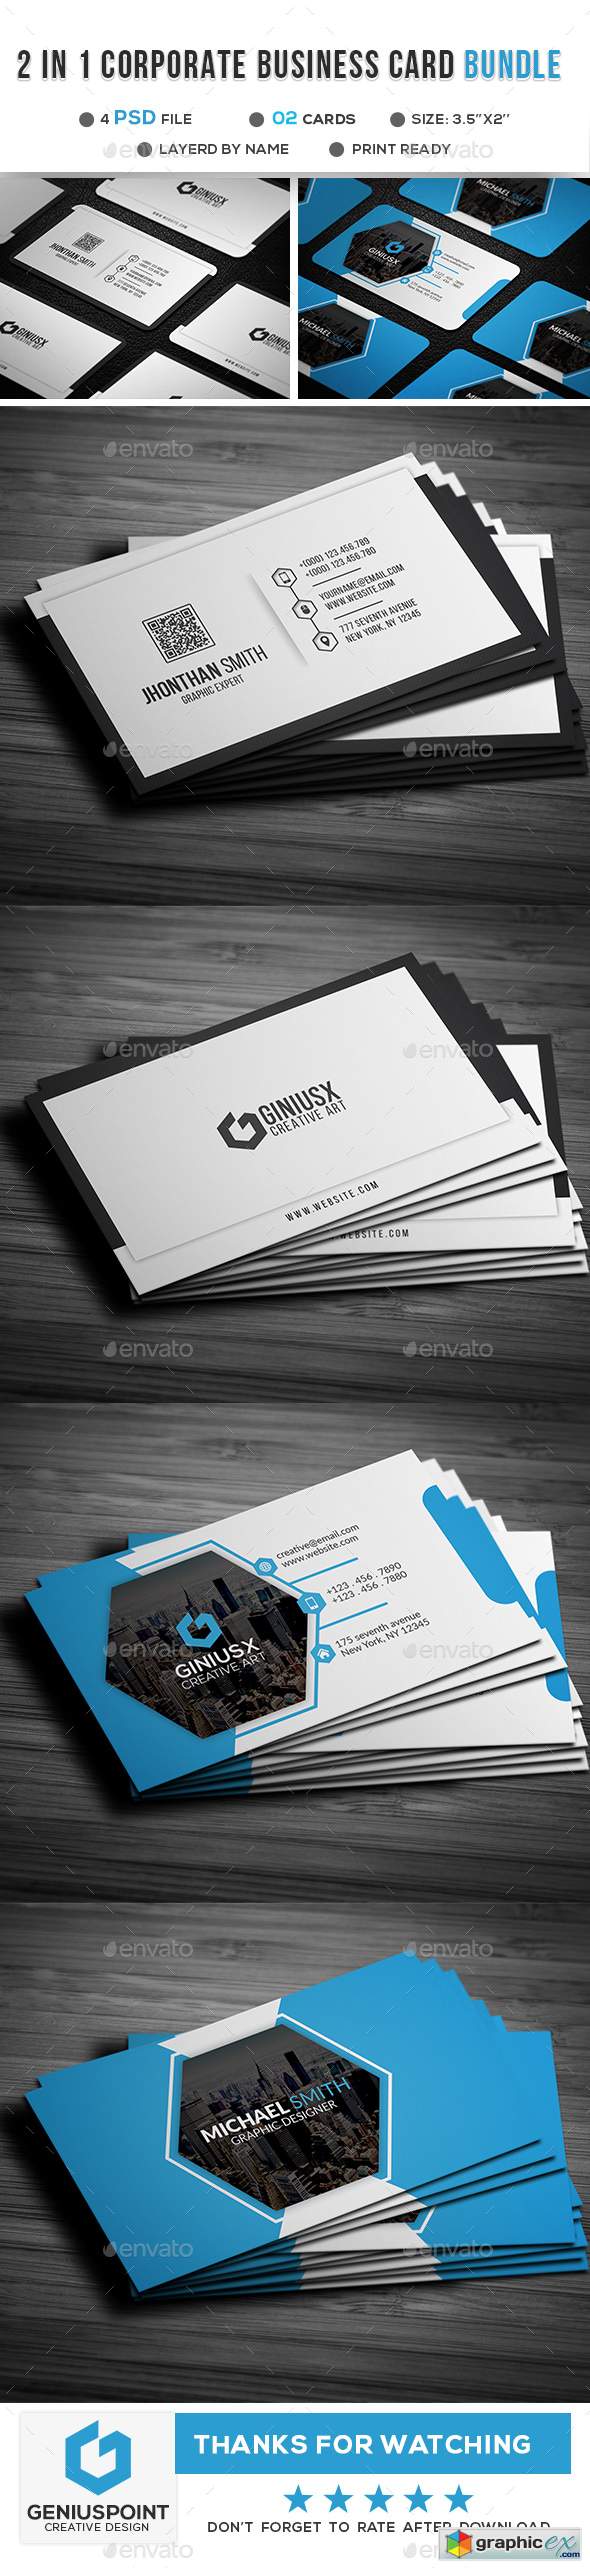 2 in 1 Corporate Business Card 21889670